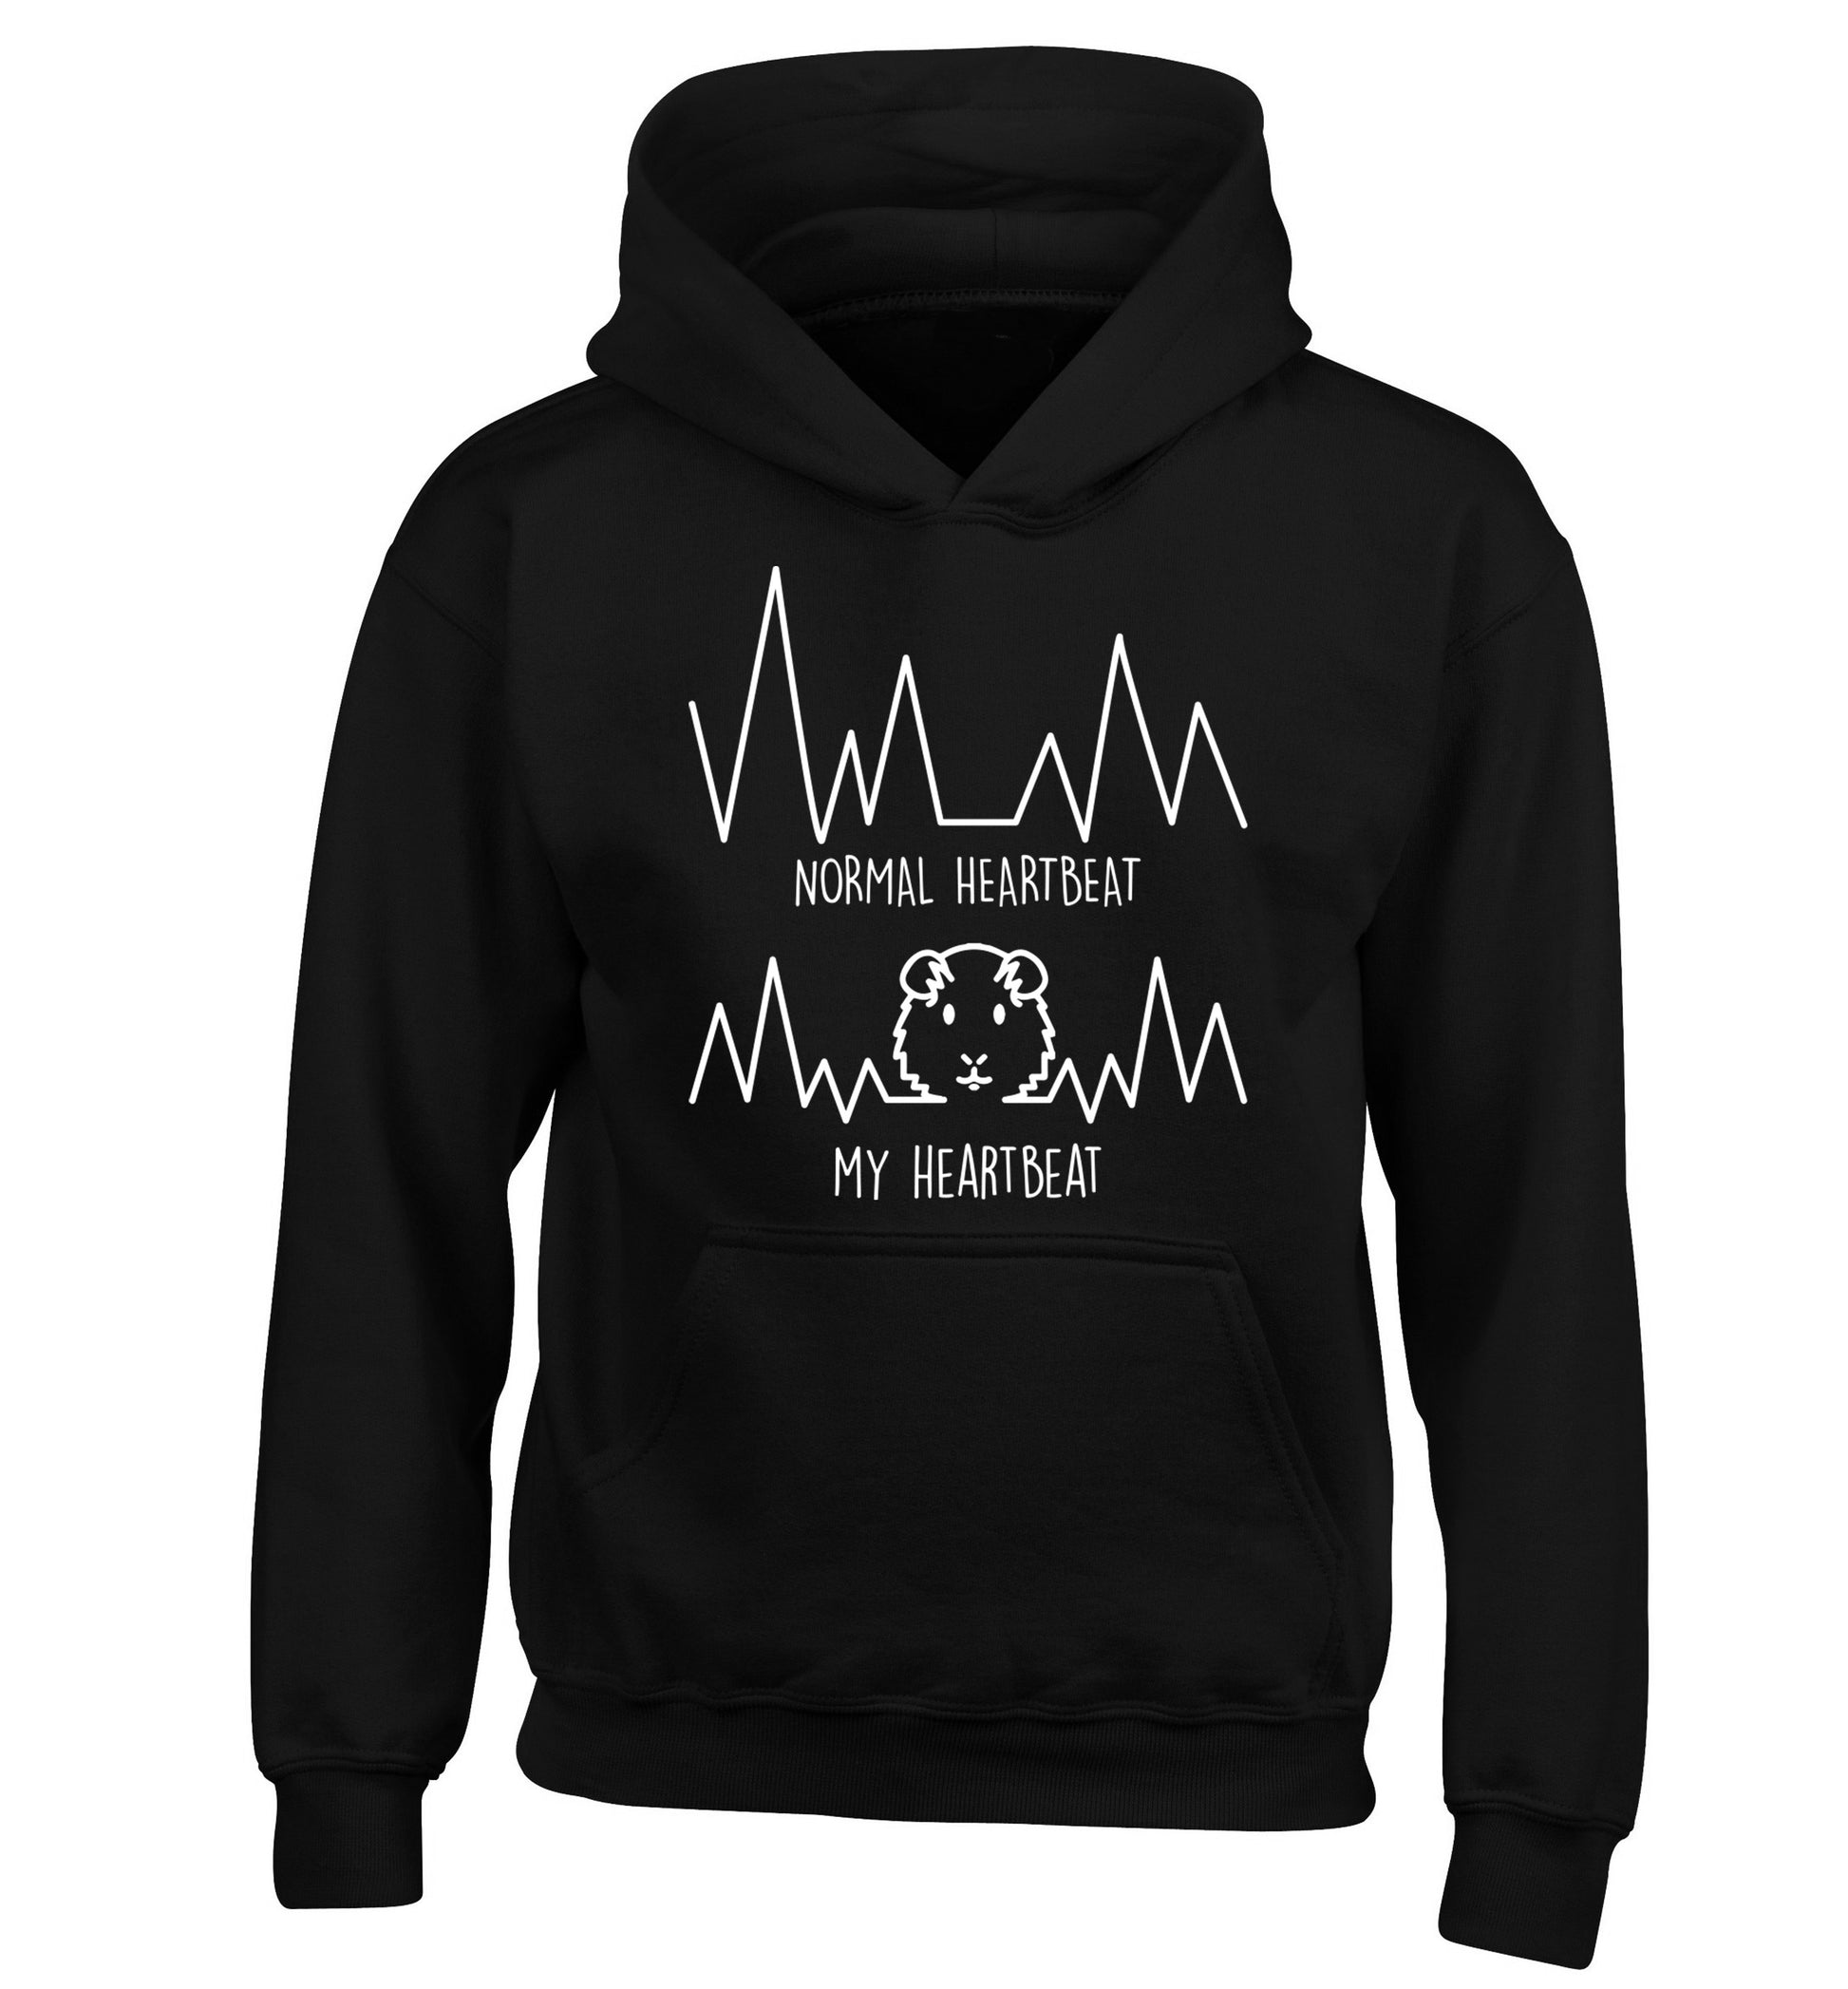 Normal heartbeat vs my heartbeat guinea pig lover children's black hoodie 12-14 Years